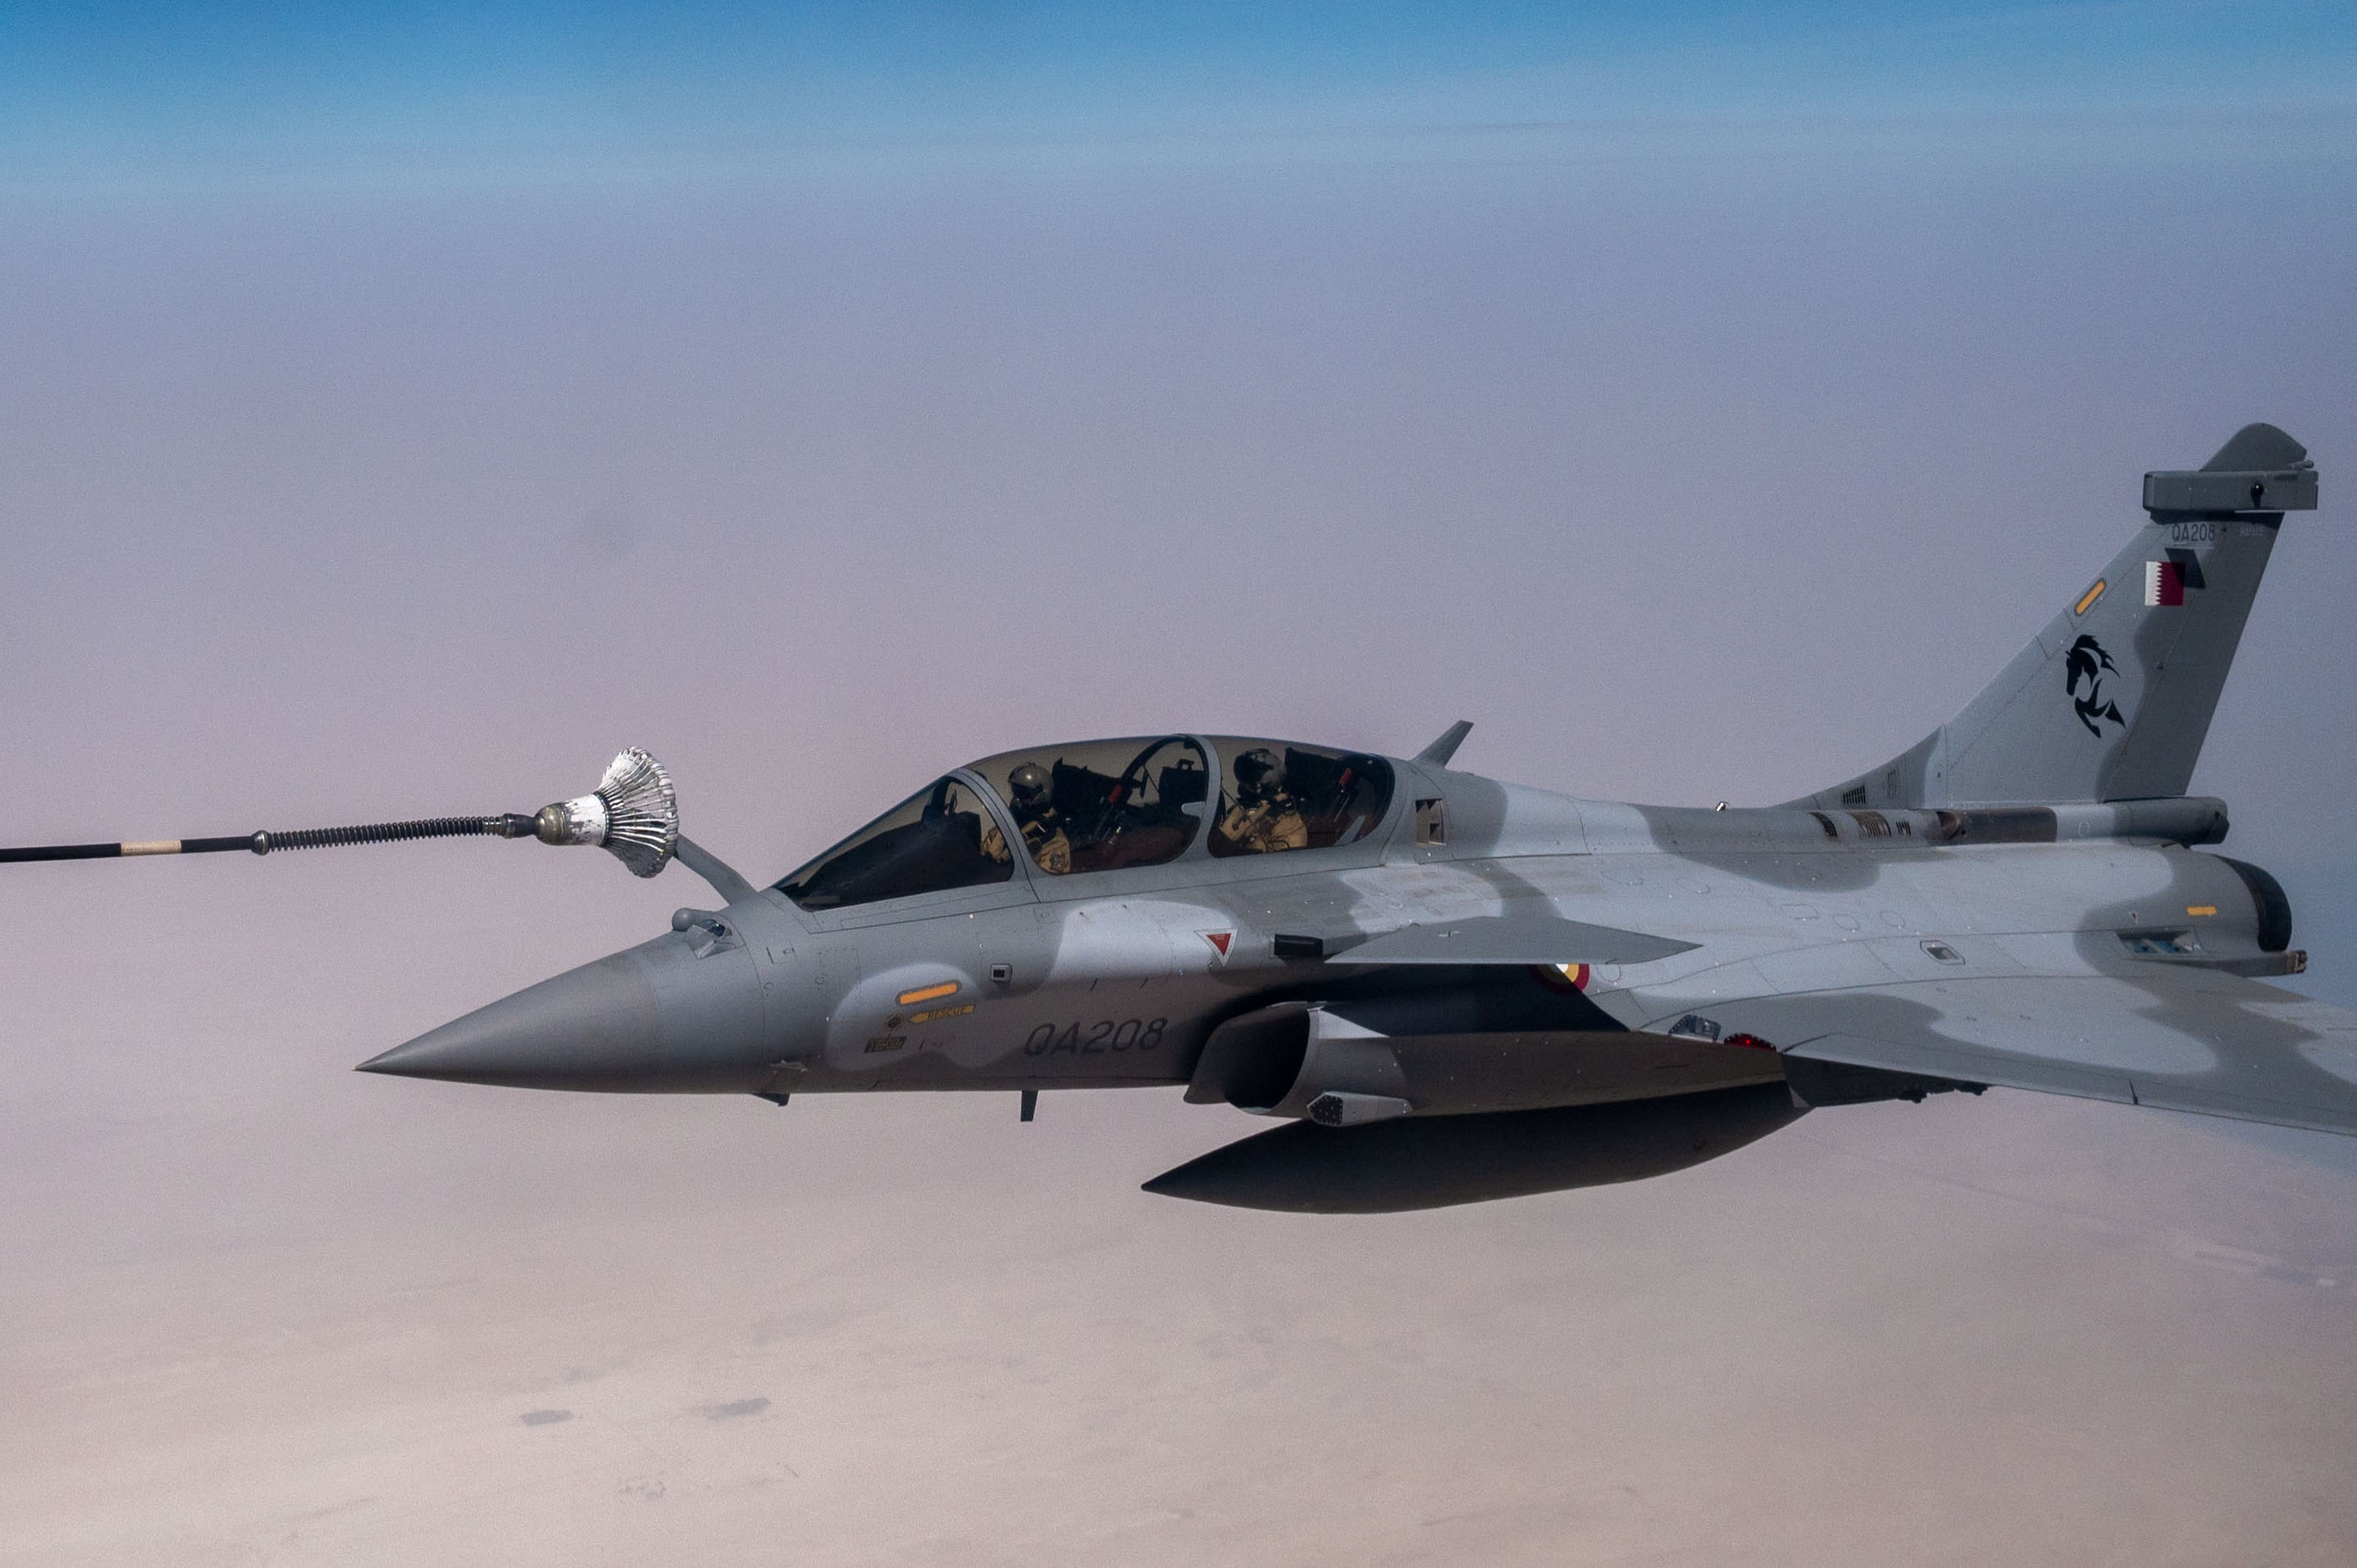 Image shows Qatari fast jet during air-to-air refuelling.